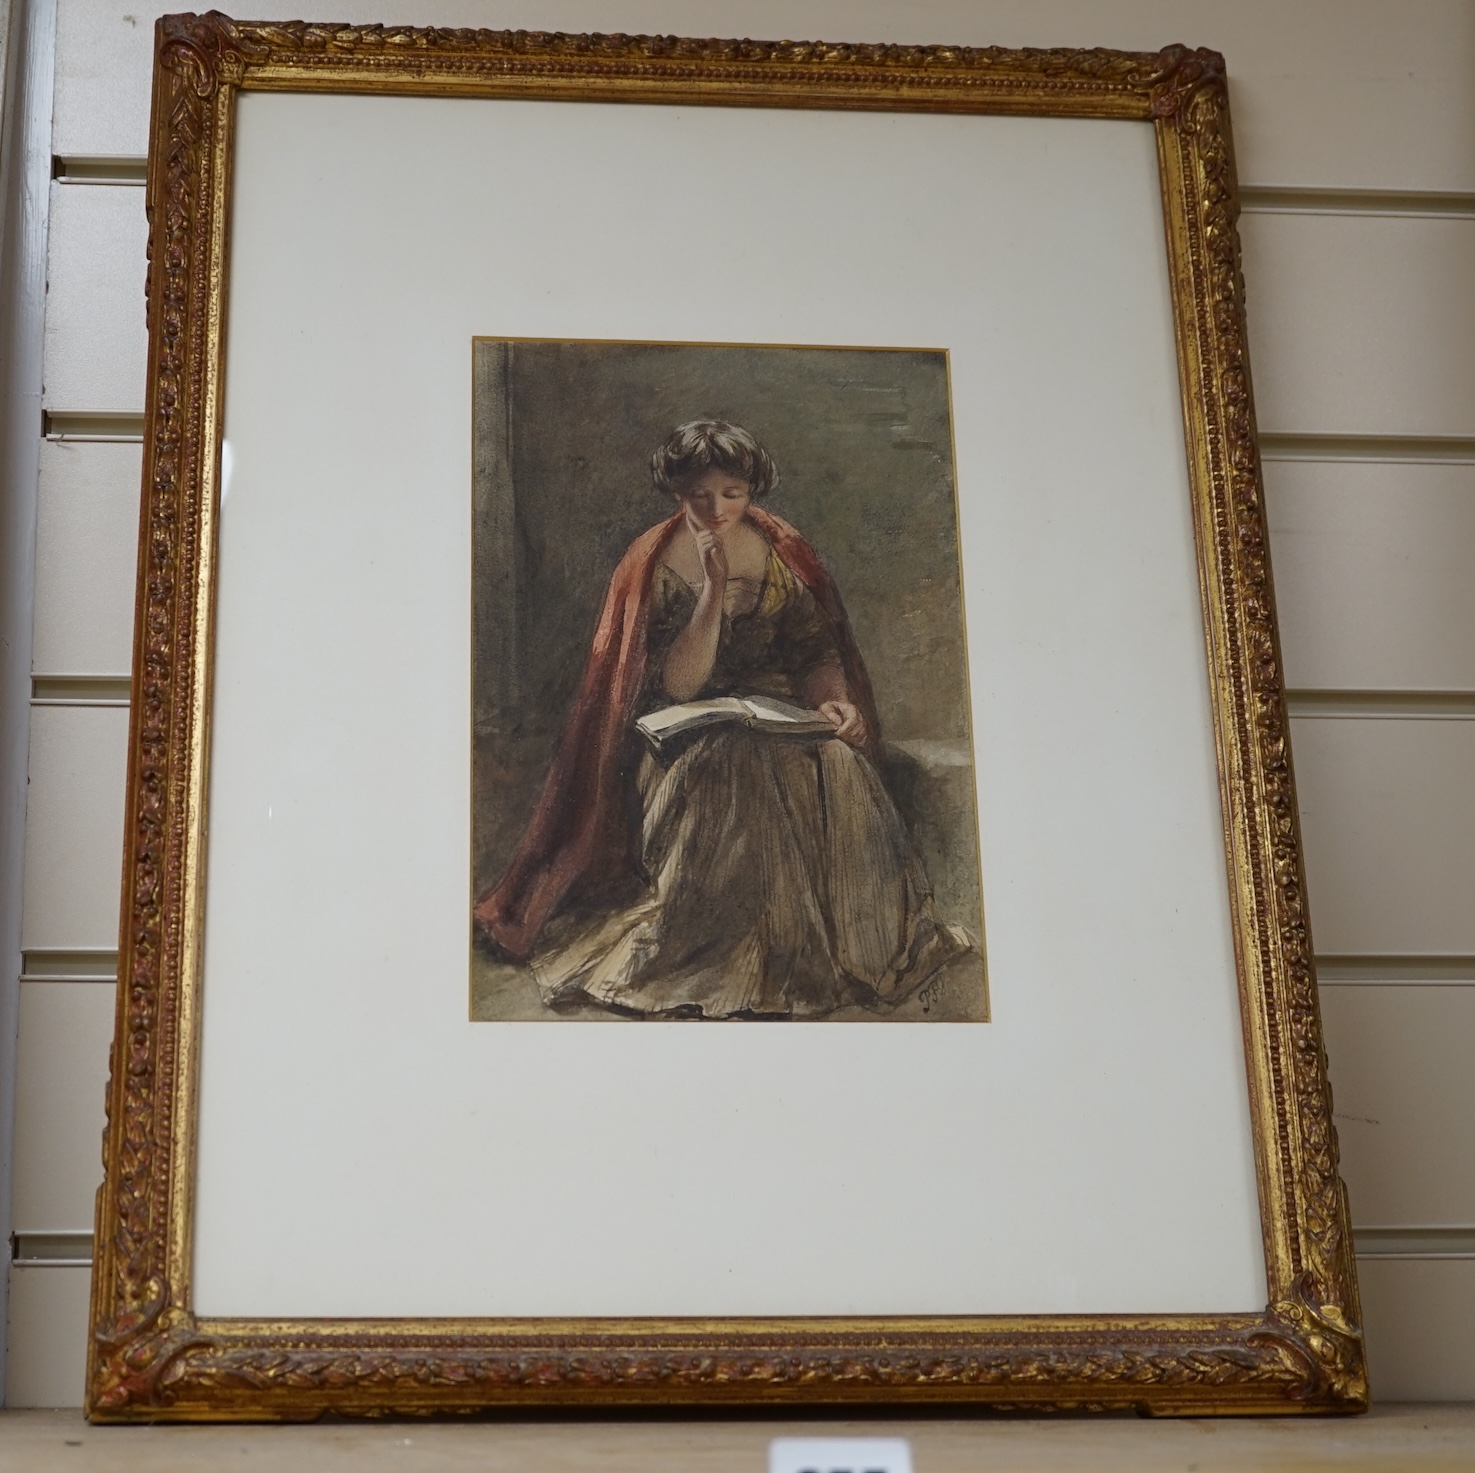 Late 19th century English School, Pre-Raphaelite watercolour, Seated girl reading, indistinctly monogrammed PFB?, 25 x 17cm. Condition - fair to good